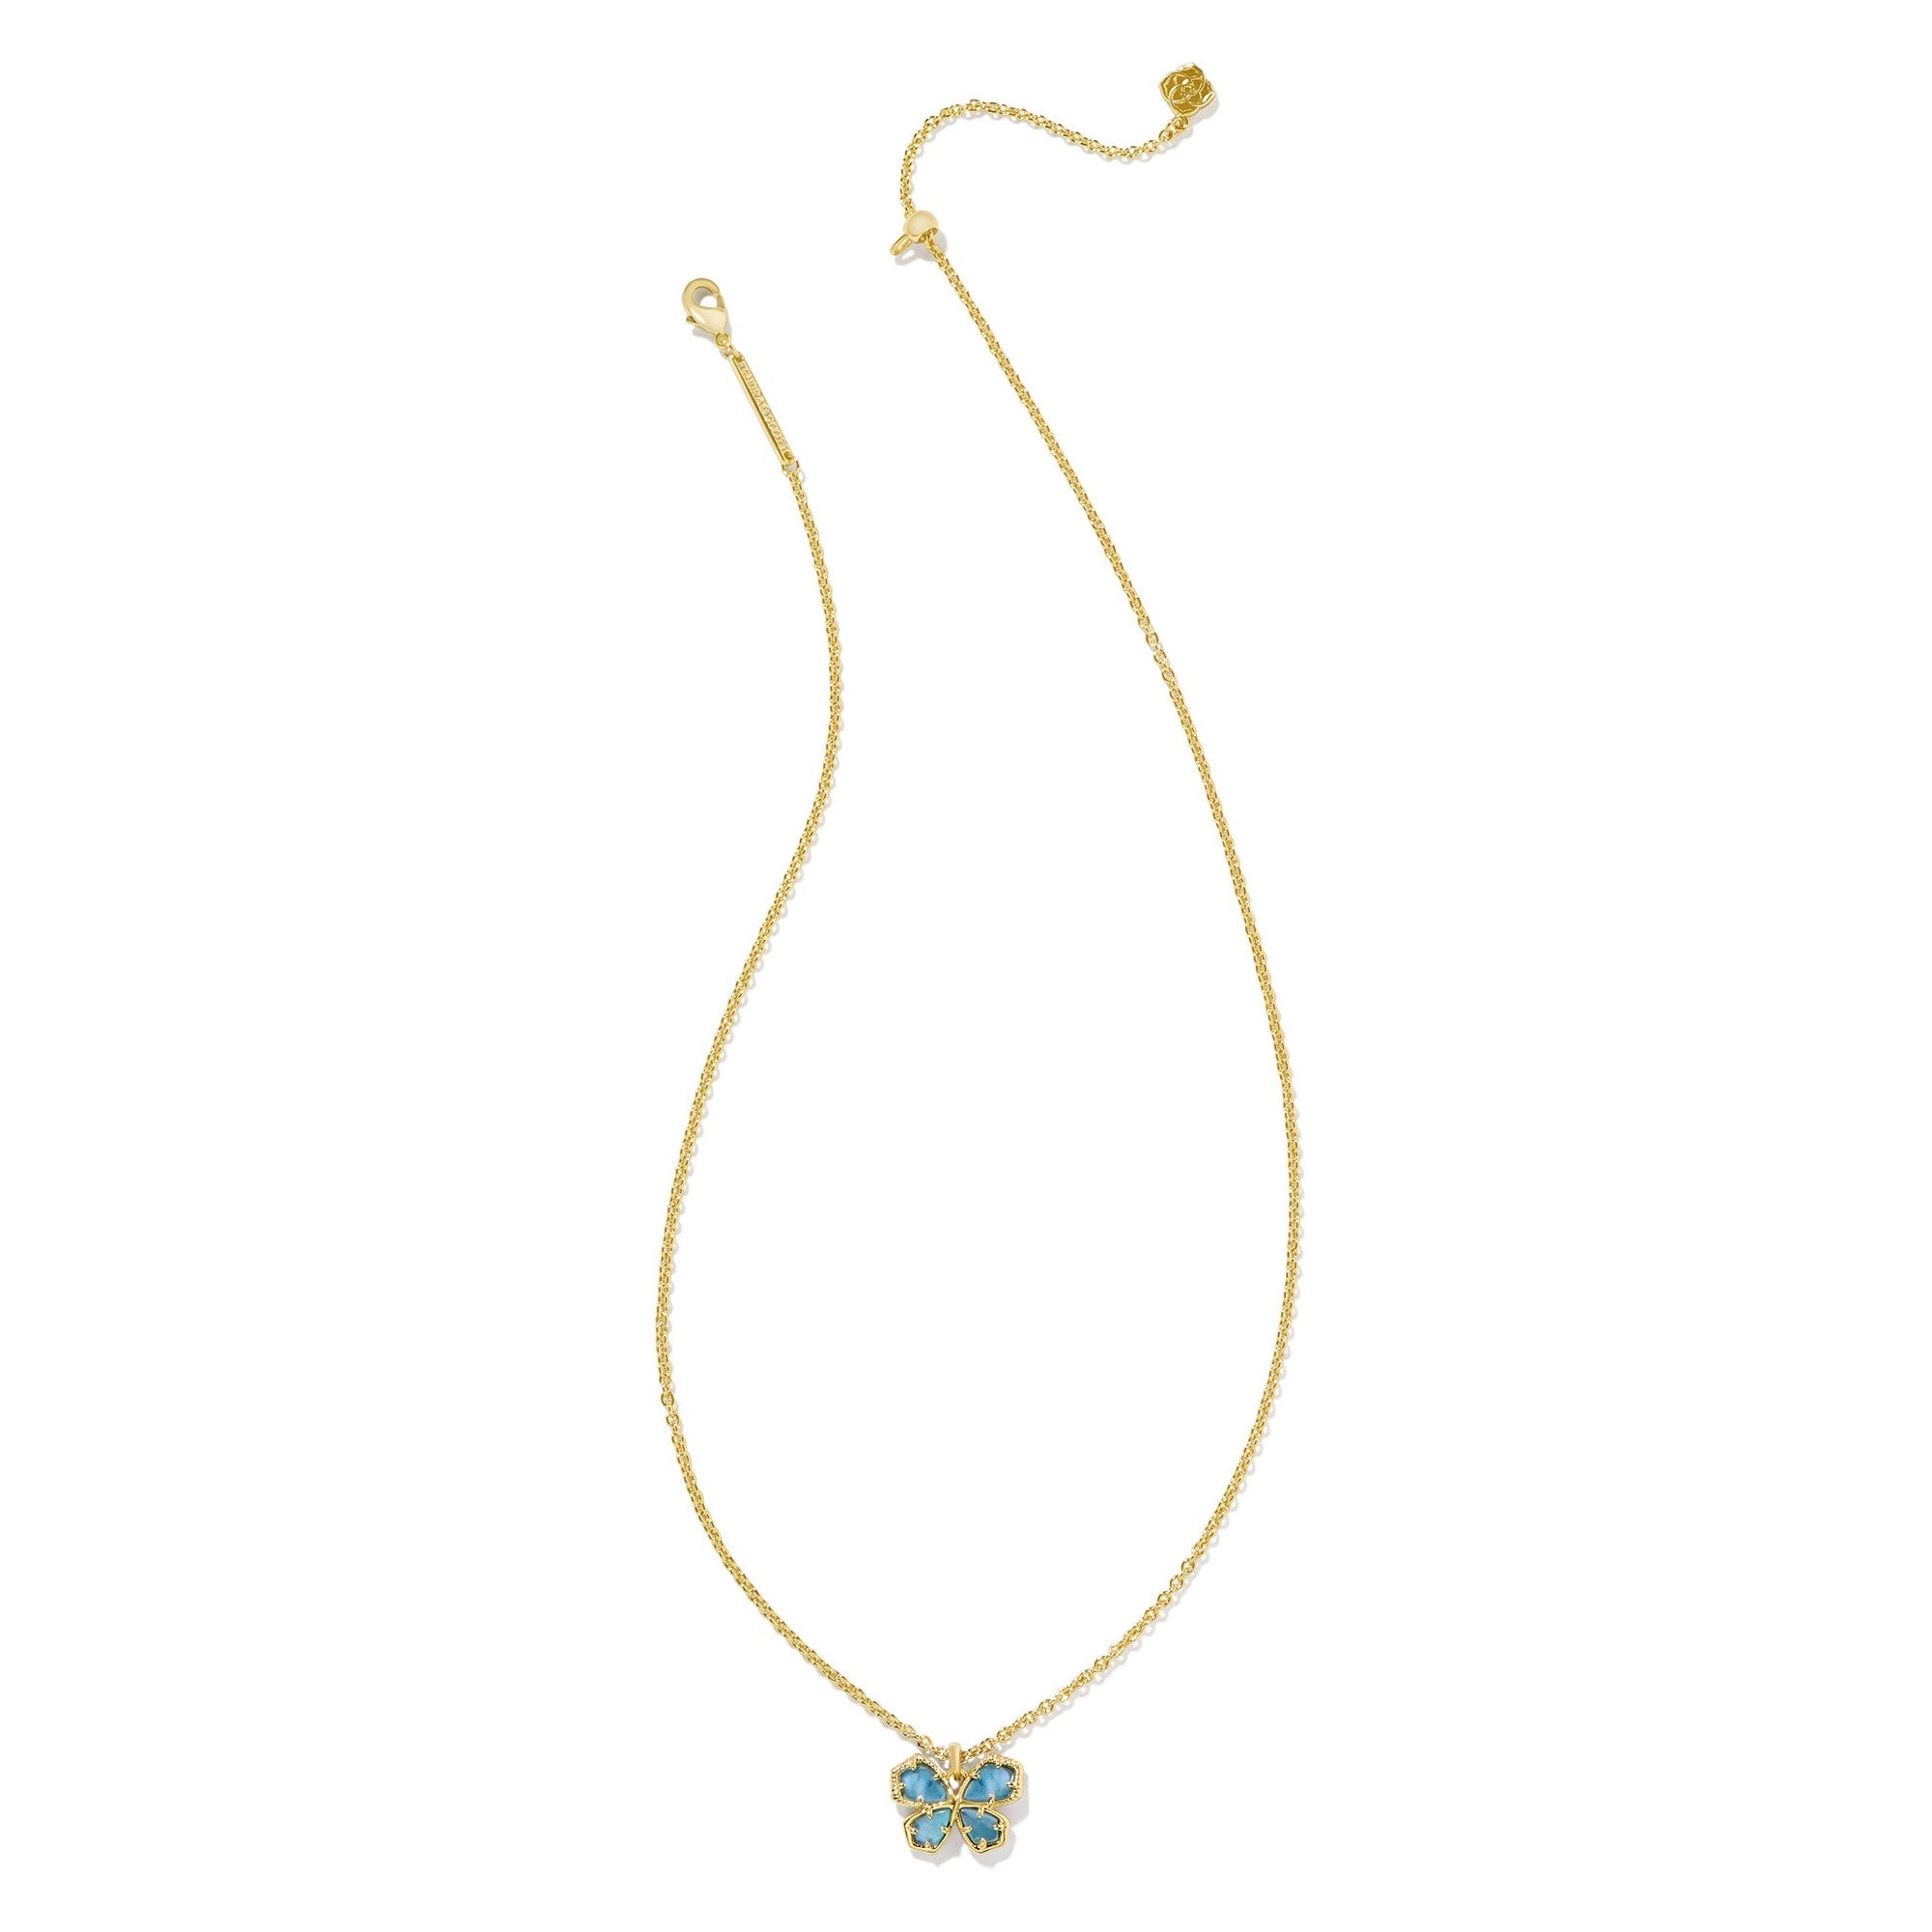 Kendra Scott | Mae Gold Butterfly Short Pendant Necklace in Indigo Watercolor Illusion - Giddy Up Glamour Boutique